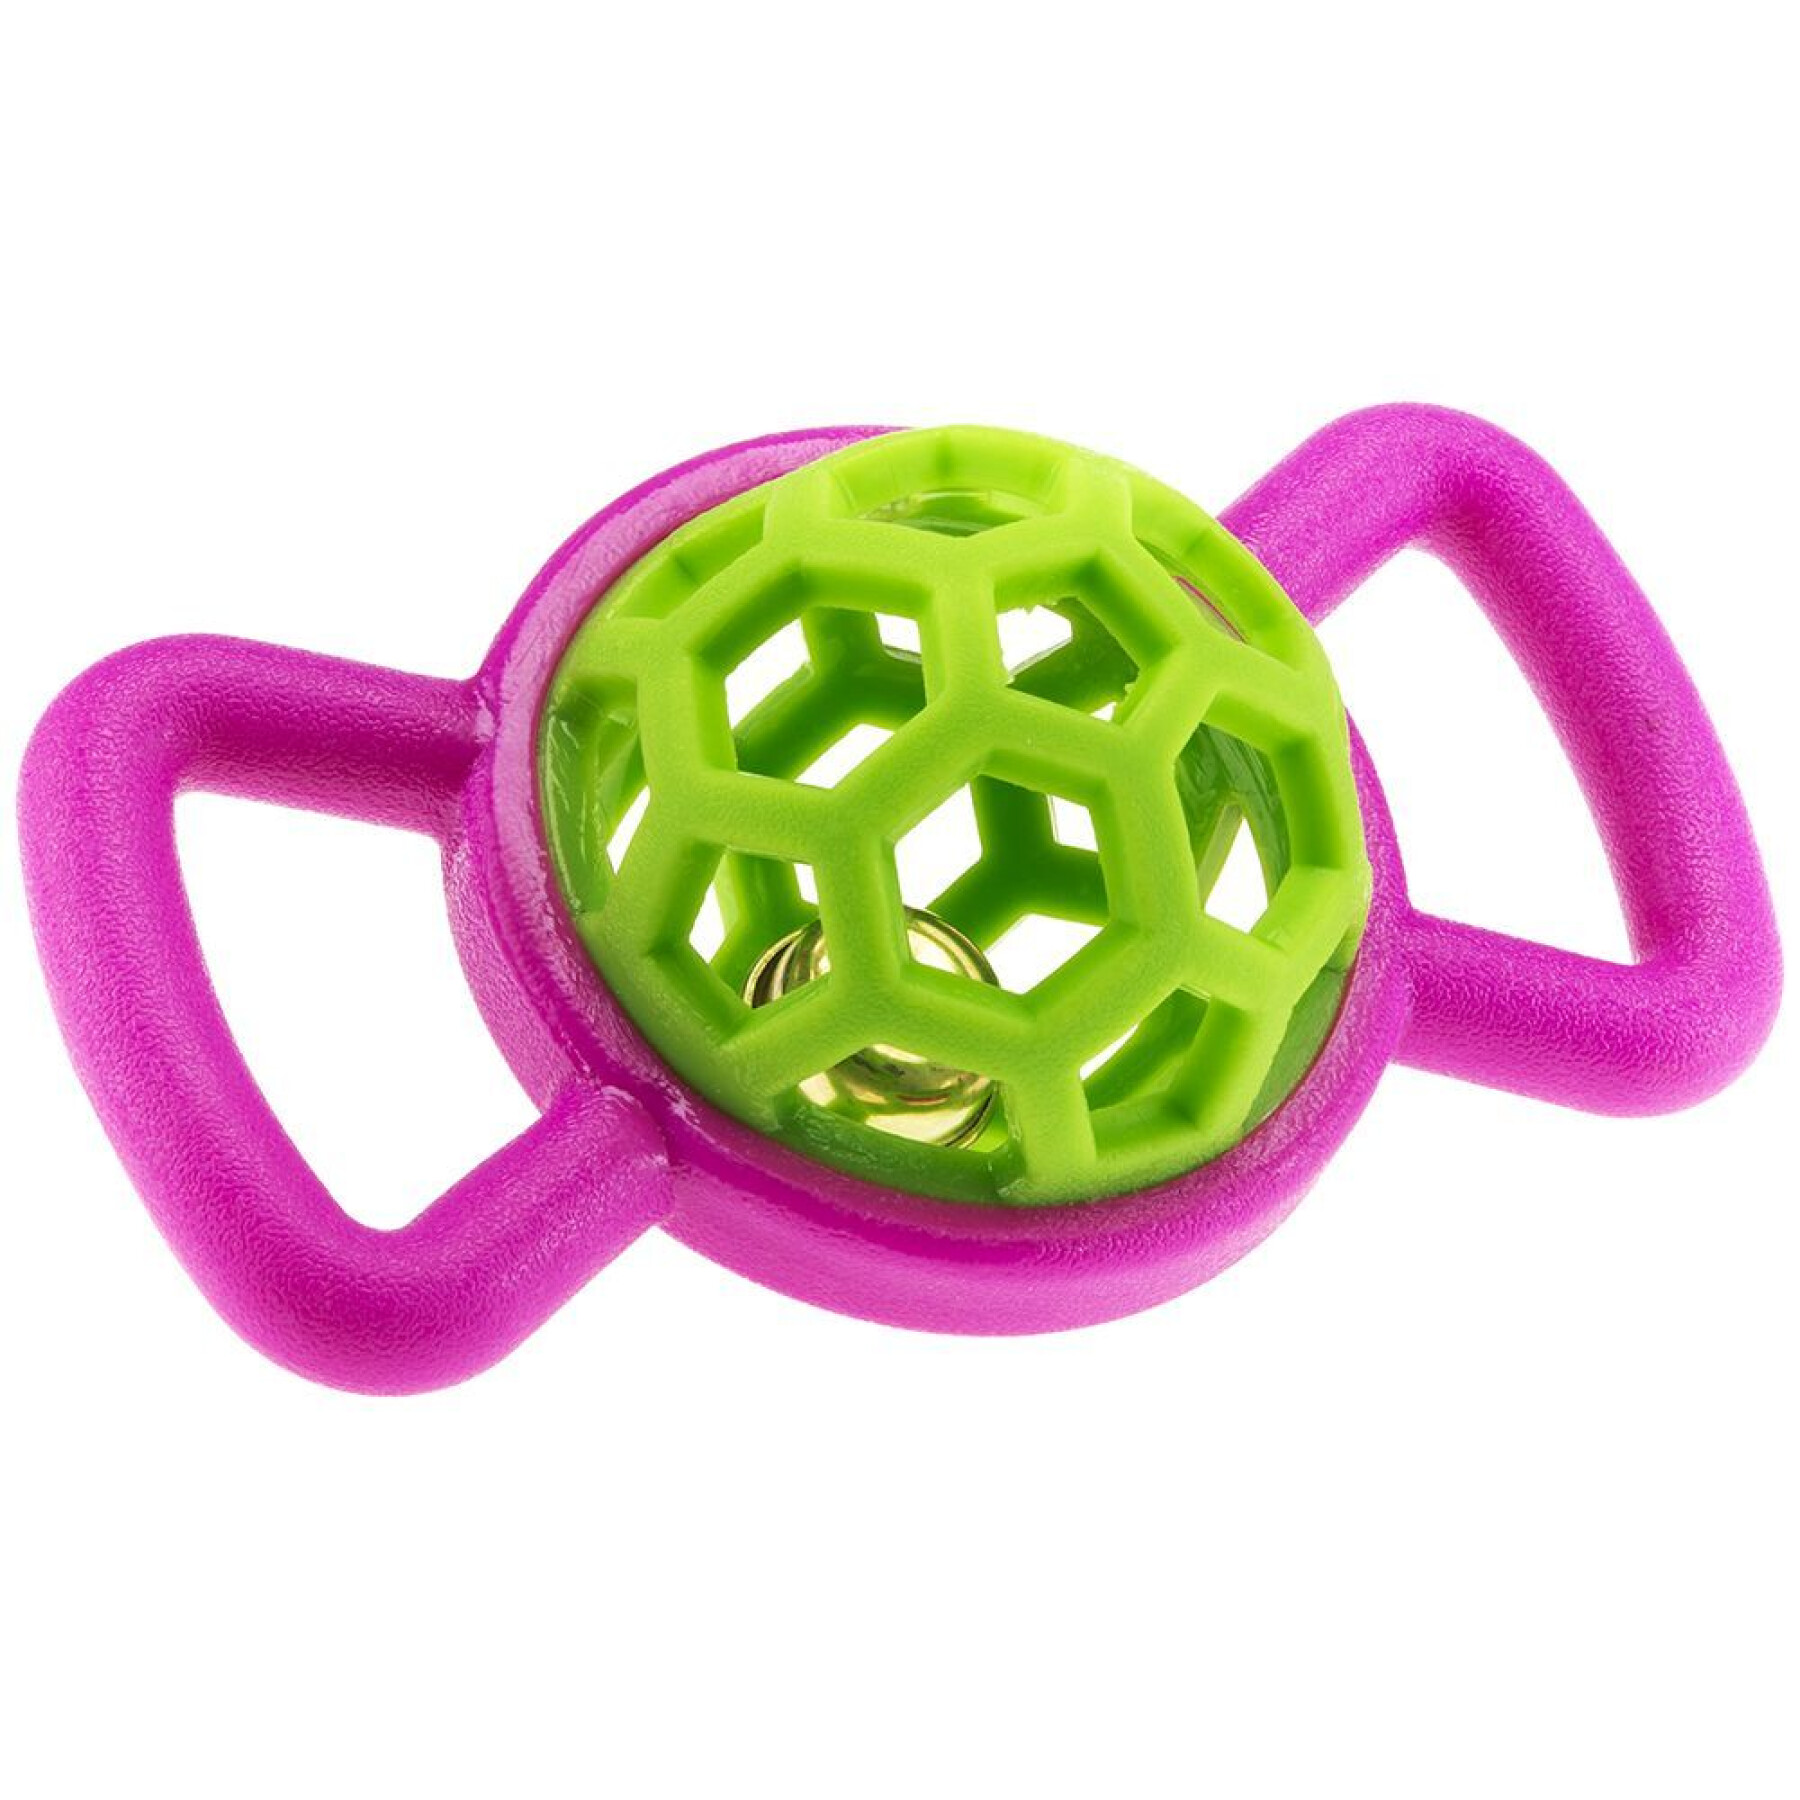 Candy toy for dogs Ferplast PA 6352